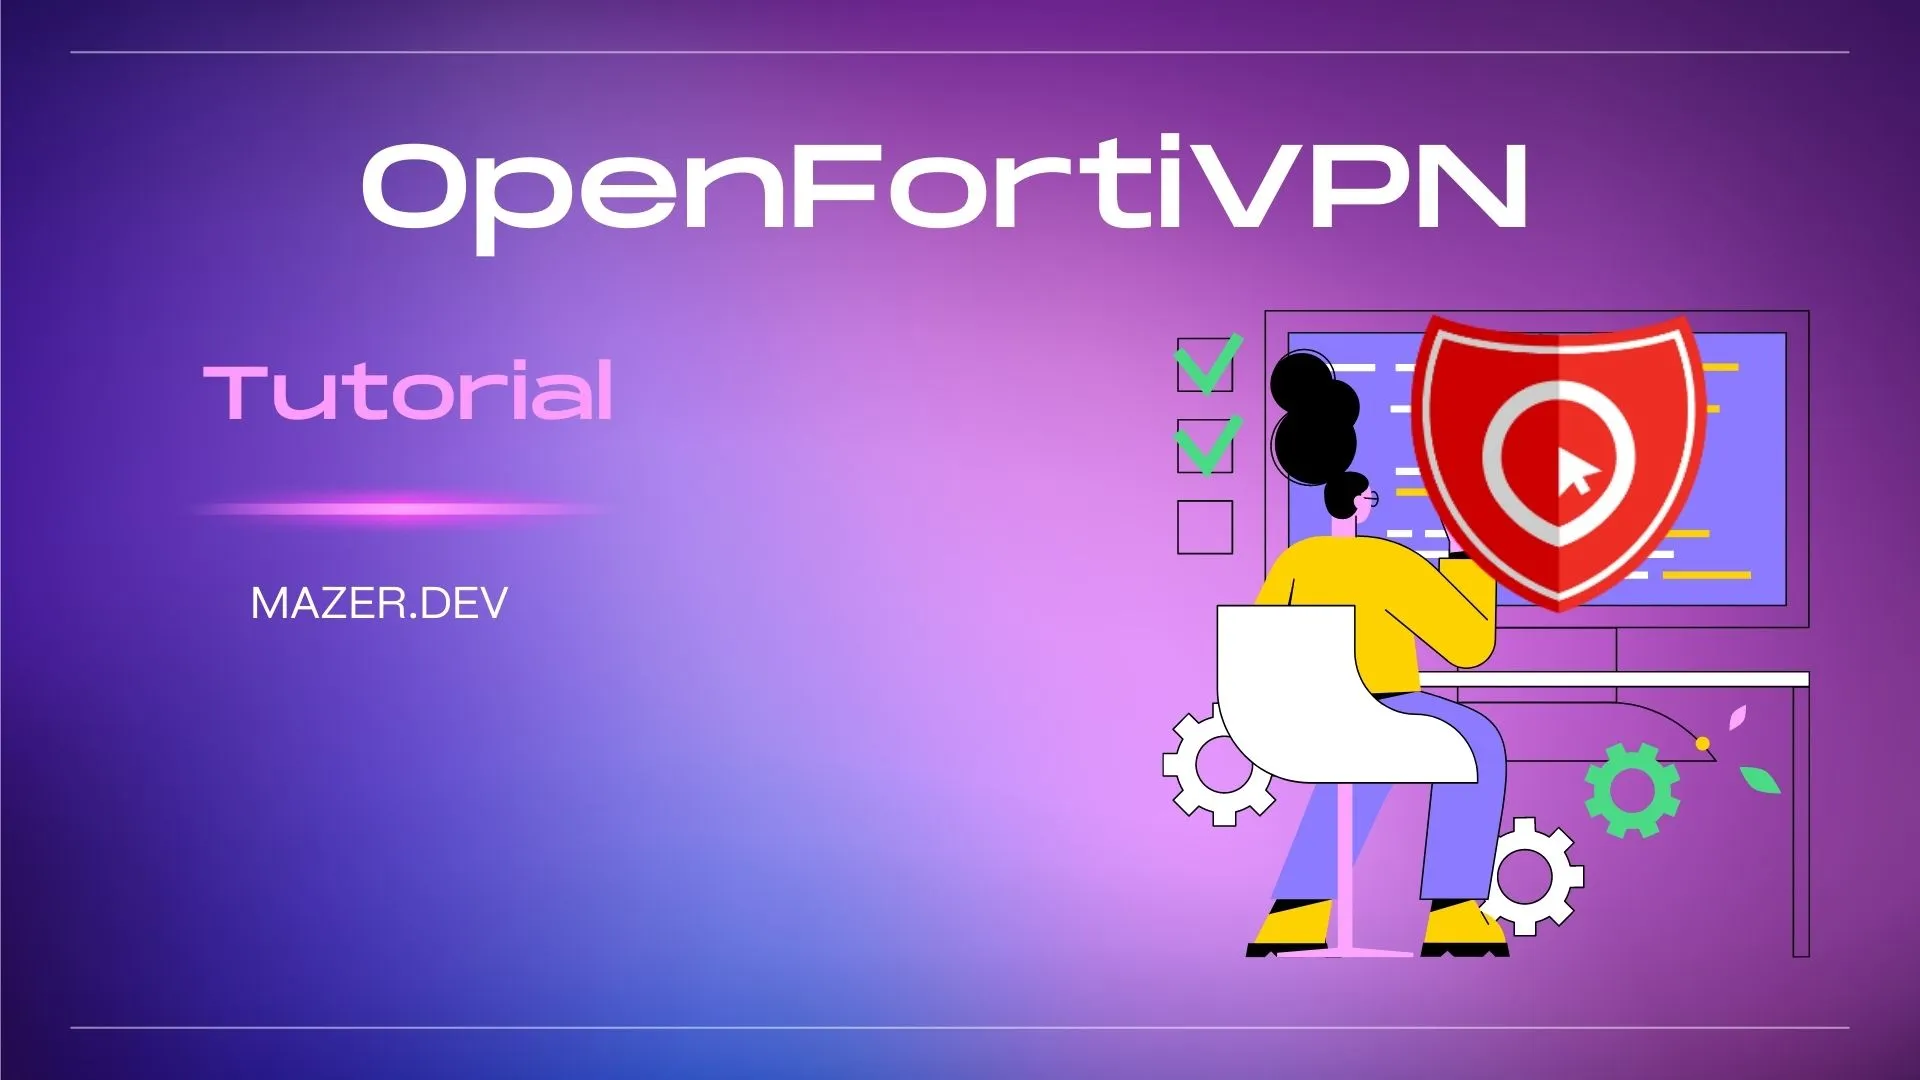 A Comprehensive Guide to Installing, Configuring, and Using OpenFortiVPN